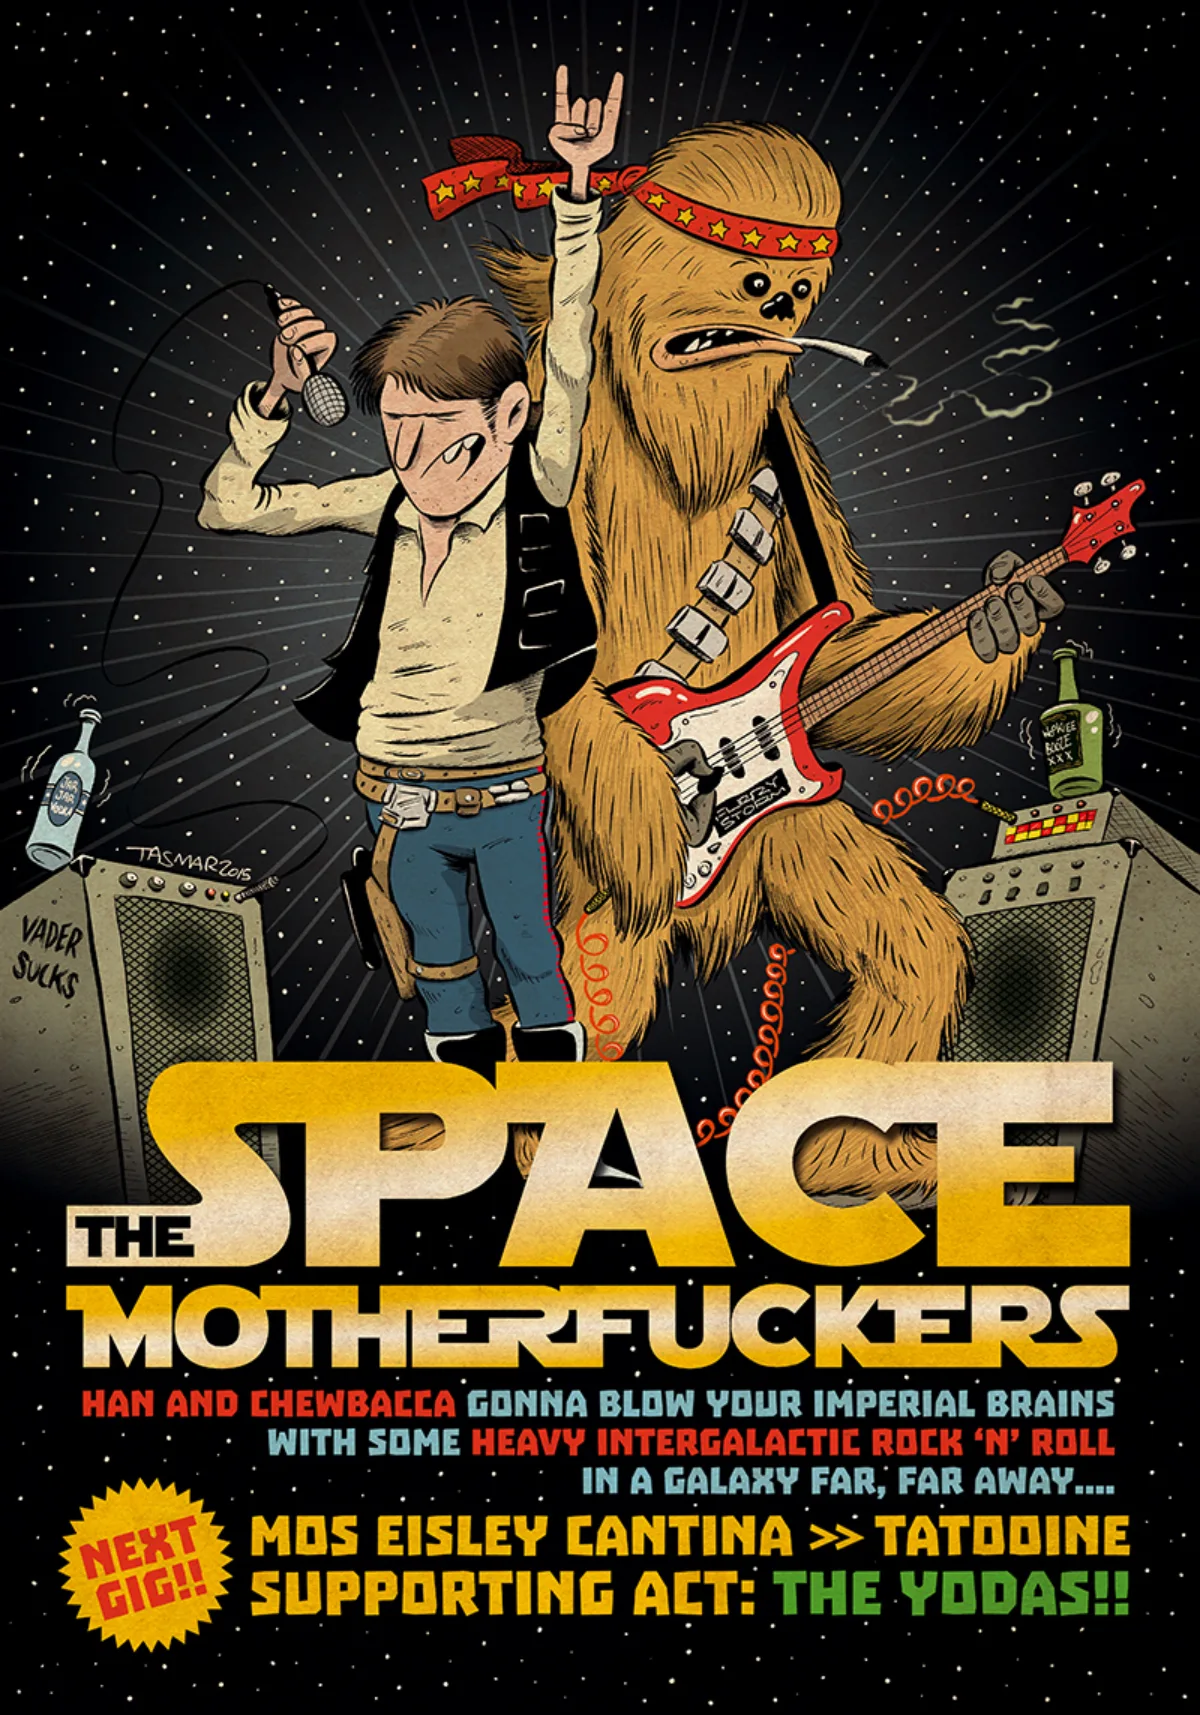 The Space Motherfuckers